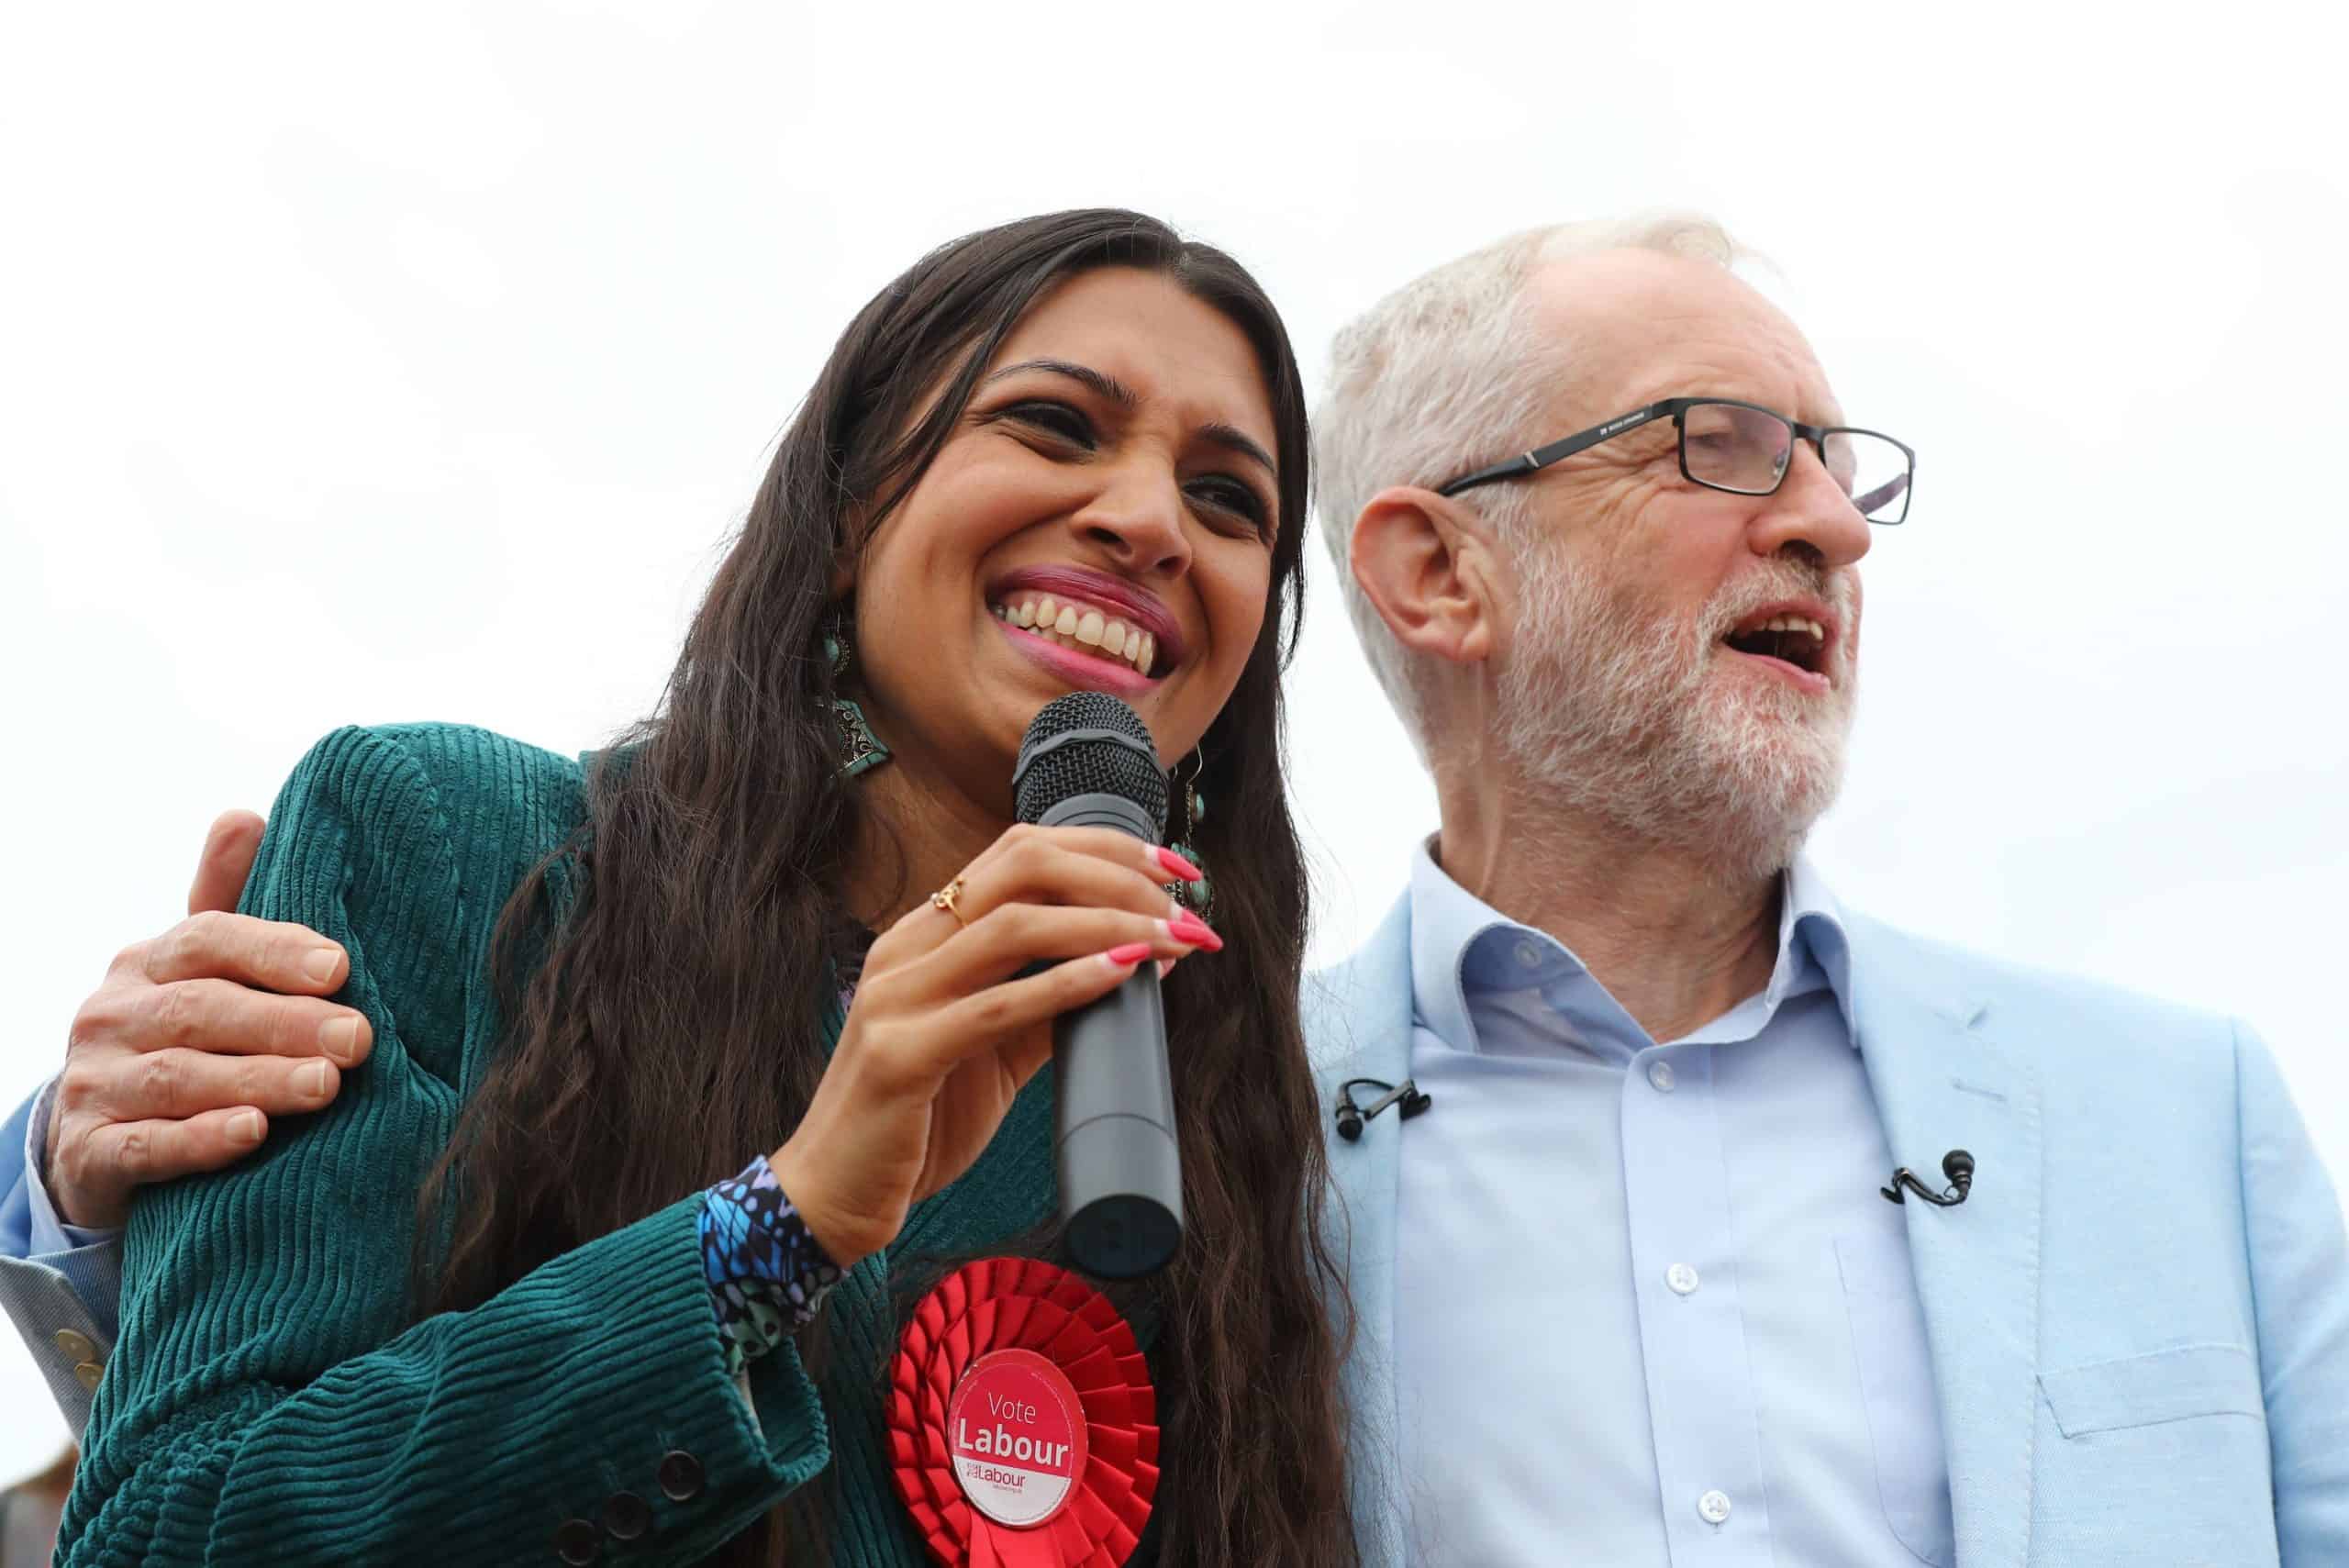 Faiza Shaheen not endorsed to be Labour candidate as Starmer purge continues